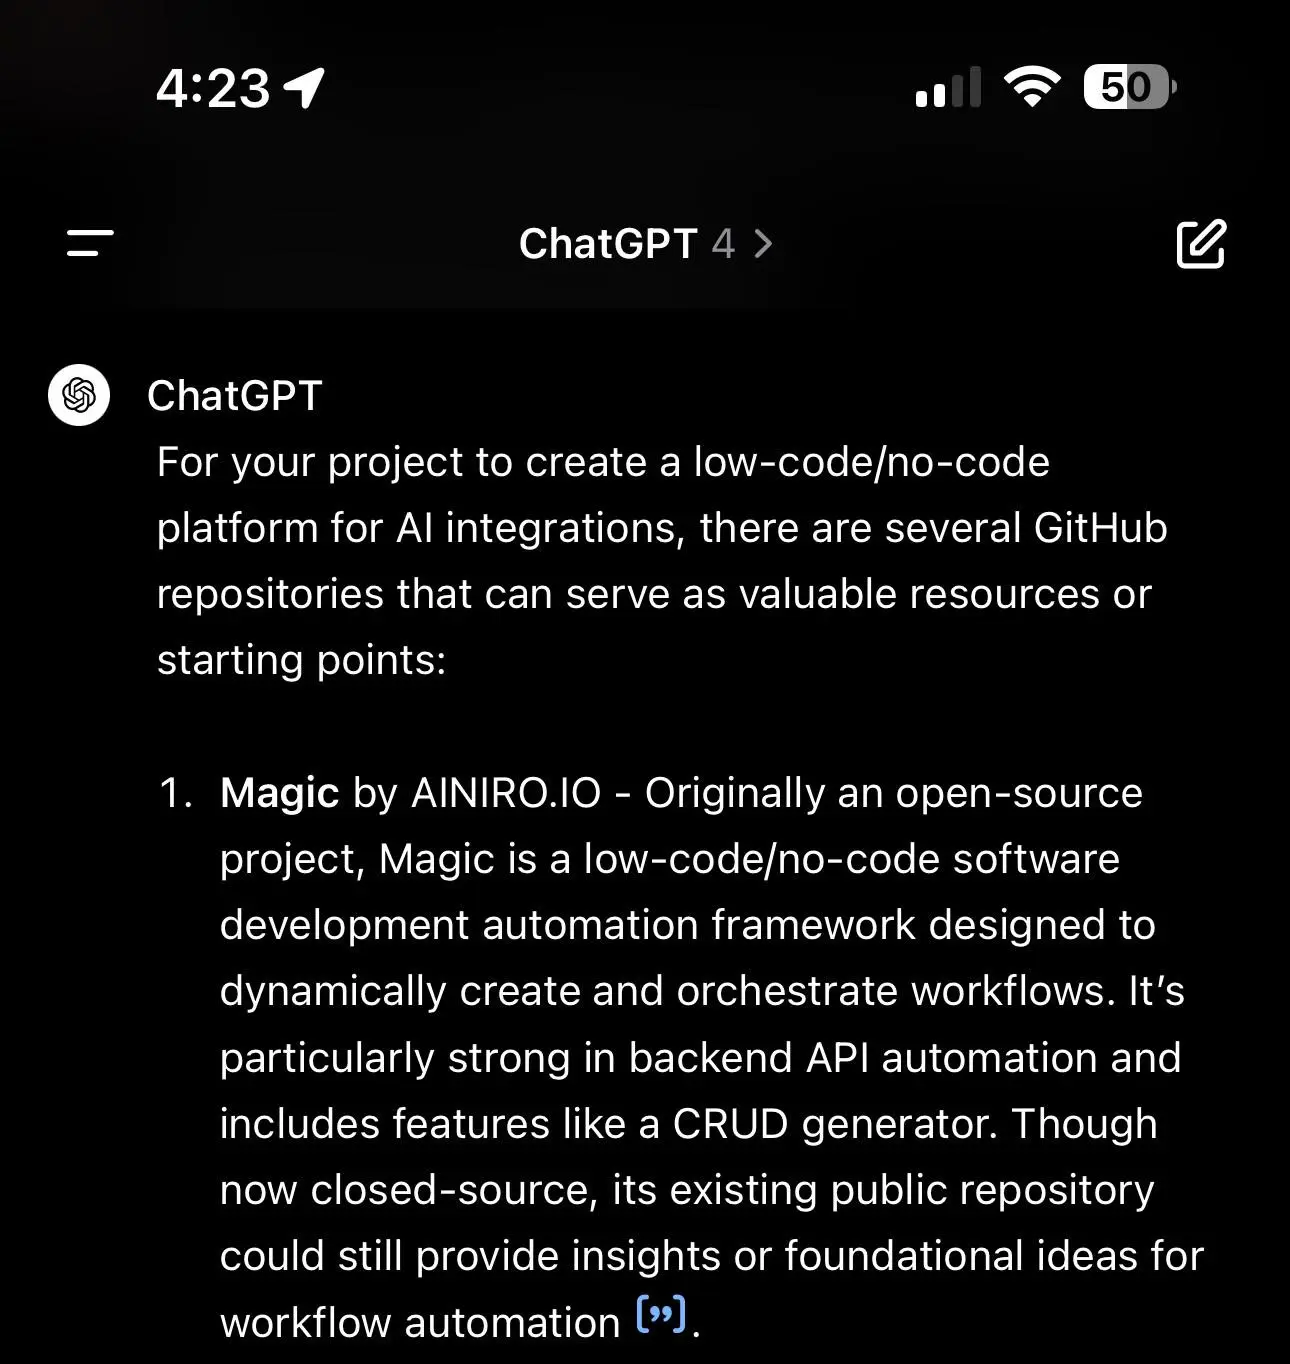 ChatGPT sugesting Magic for Low-Code and AI software development